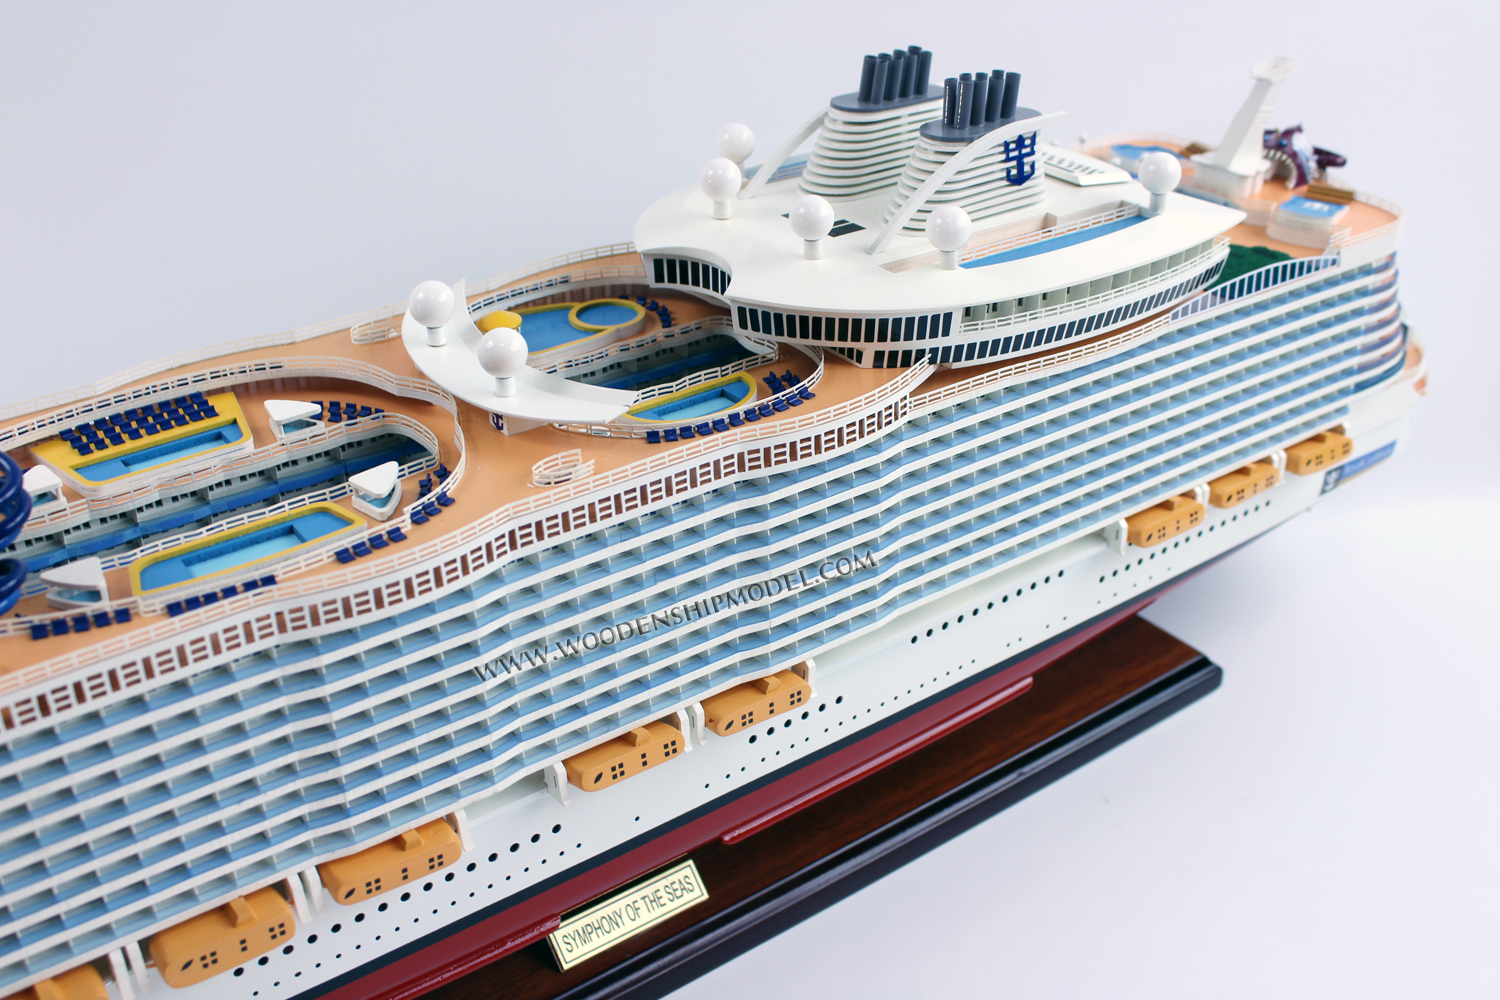 Hand-made scratch build Symphony of the Seas Model Ship, scale Symphony of the Seas model ship, ship model Symphony of the Seas, wooden ship model Symphony of the Seas, hand-made ship model Symphony of the Seas with lights, display ship model Symphony of the Seas, Symphony of the Seas model, woodenshipmodel, woodenmodelboat, gianhien, gia nhien co., ltd, gia nhien co model boat and ship builder